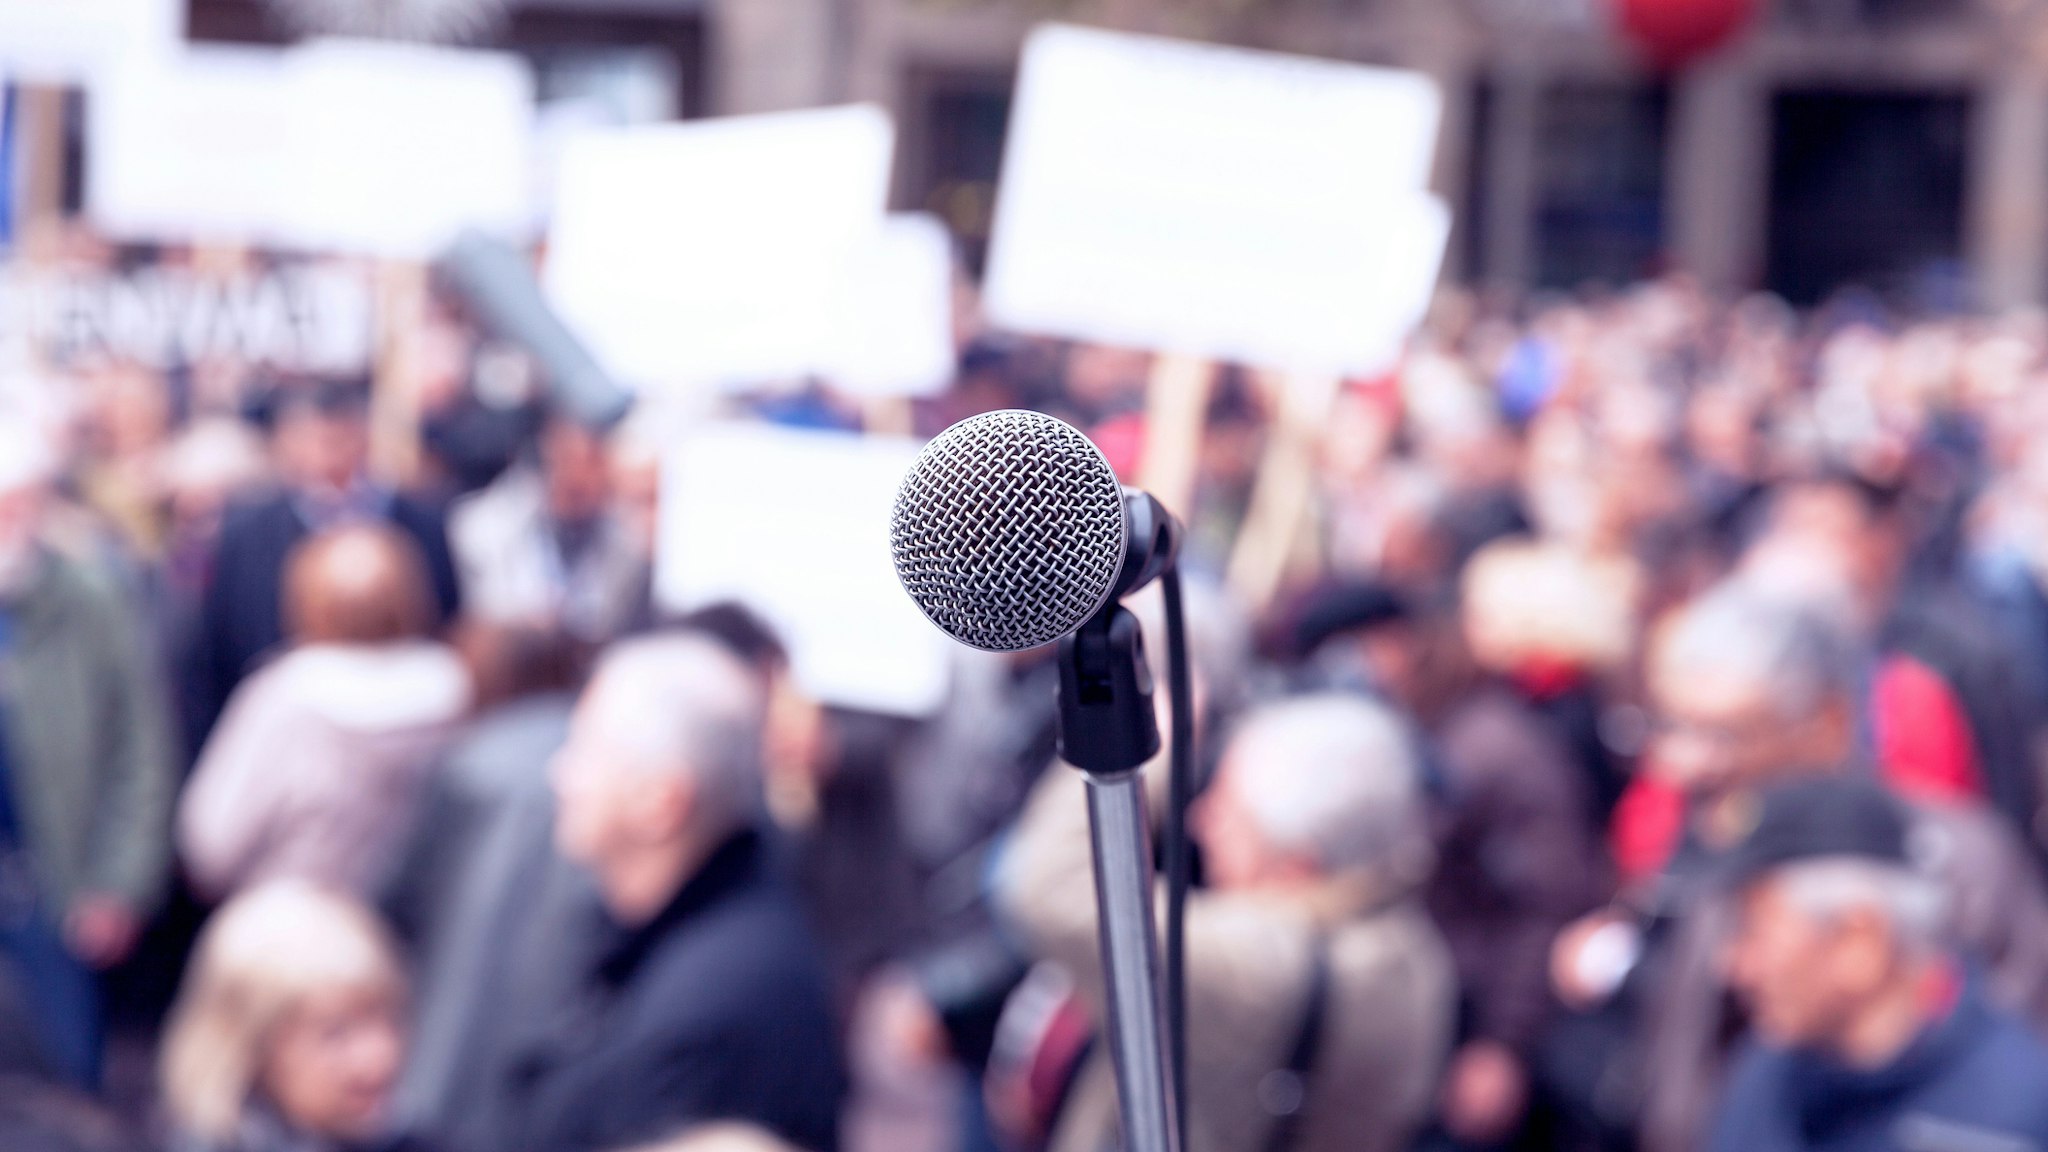 Microphone in focus against blurred protesters